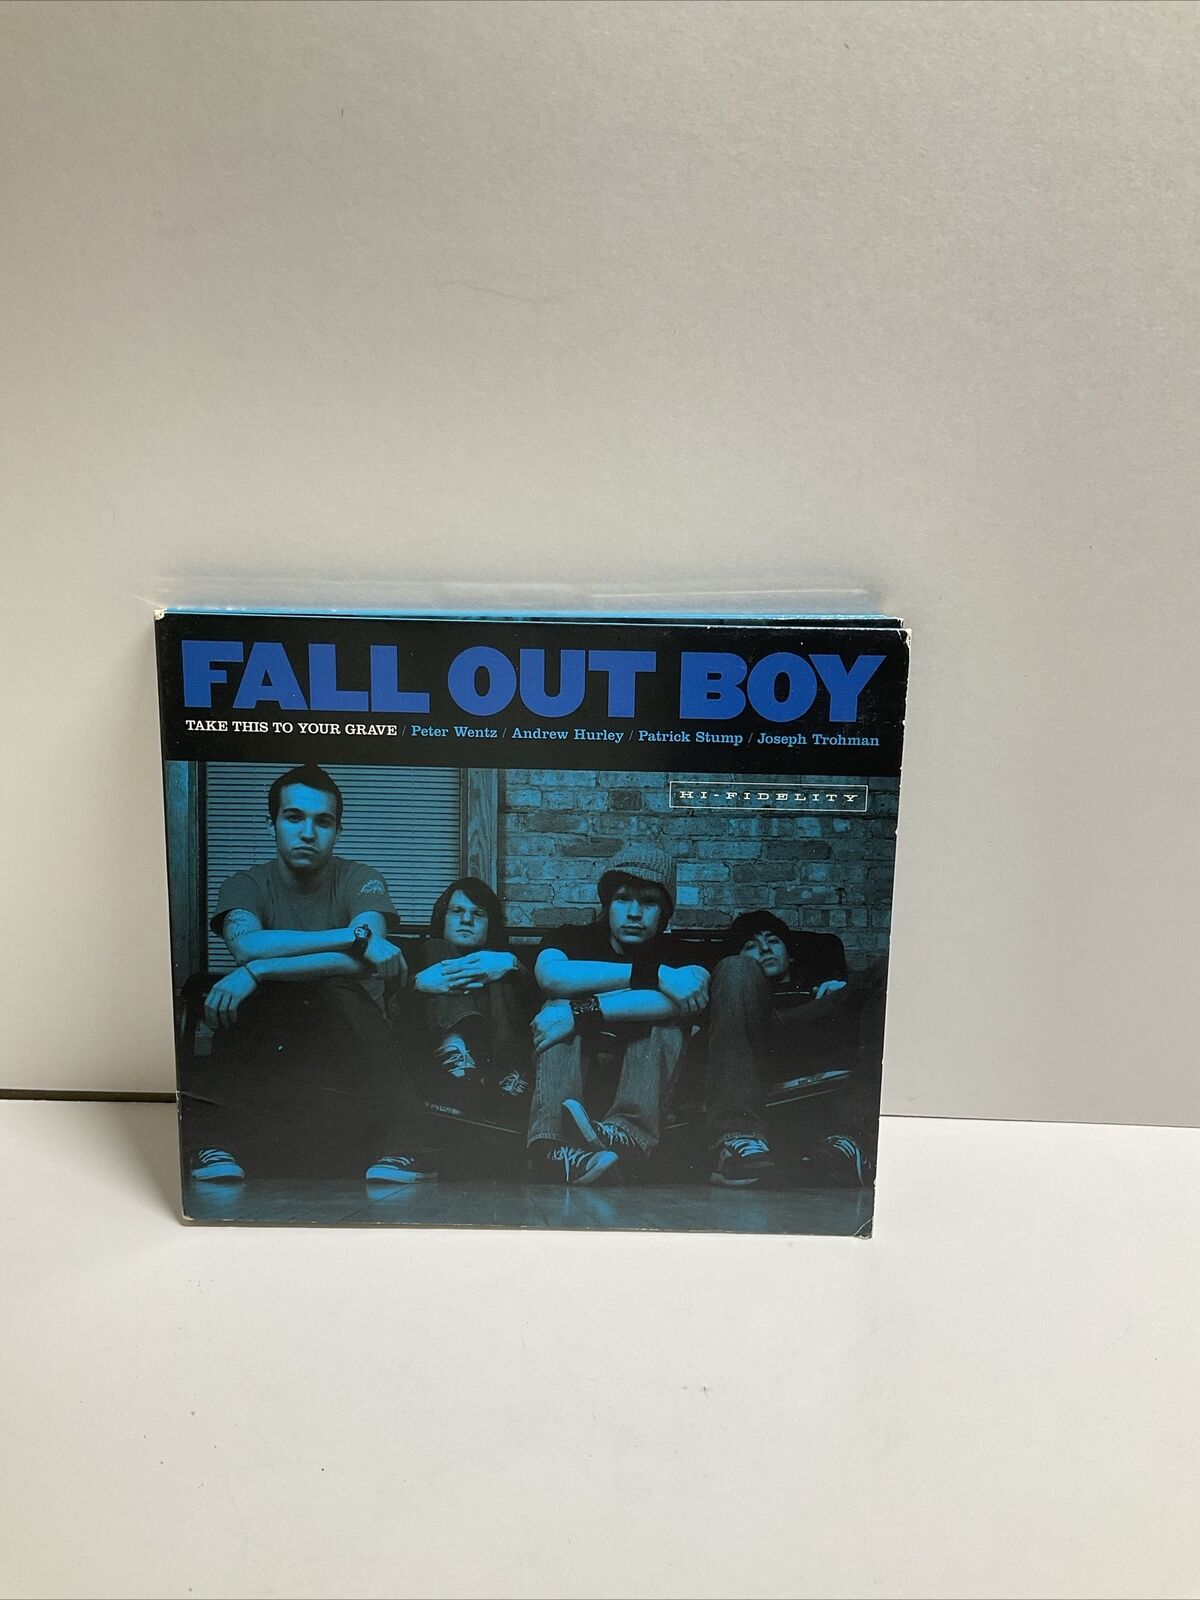 Take This to Your Grave [Digipak] by Fall Out Boy (CD, 2000, Fueled By Ramen)HTF